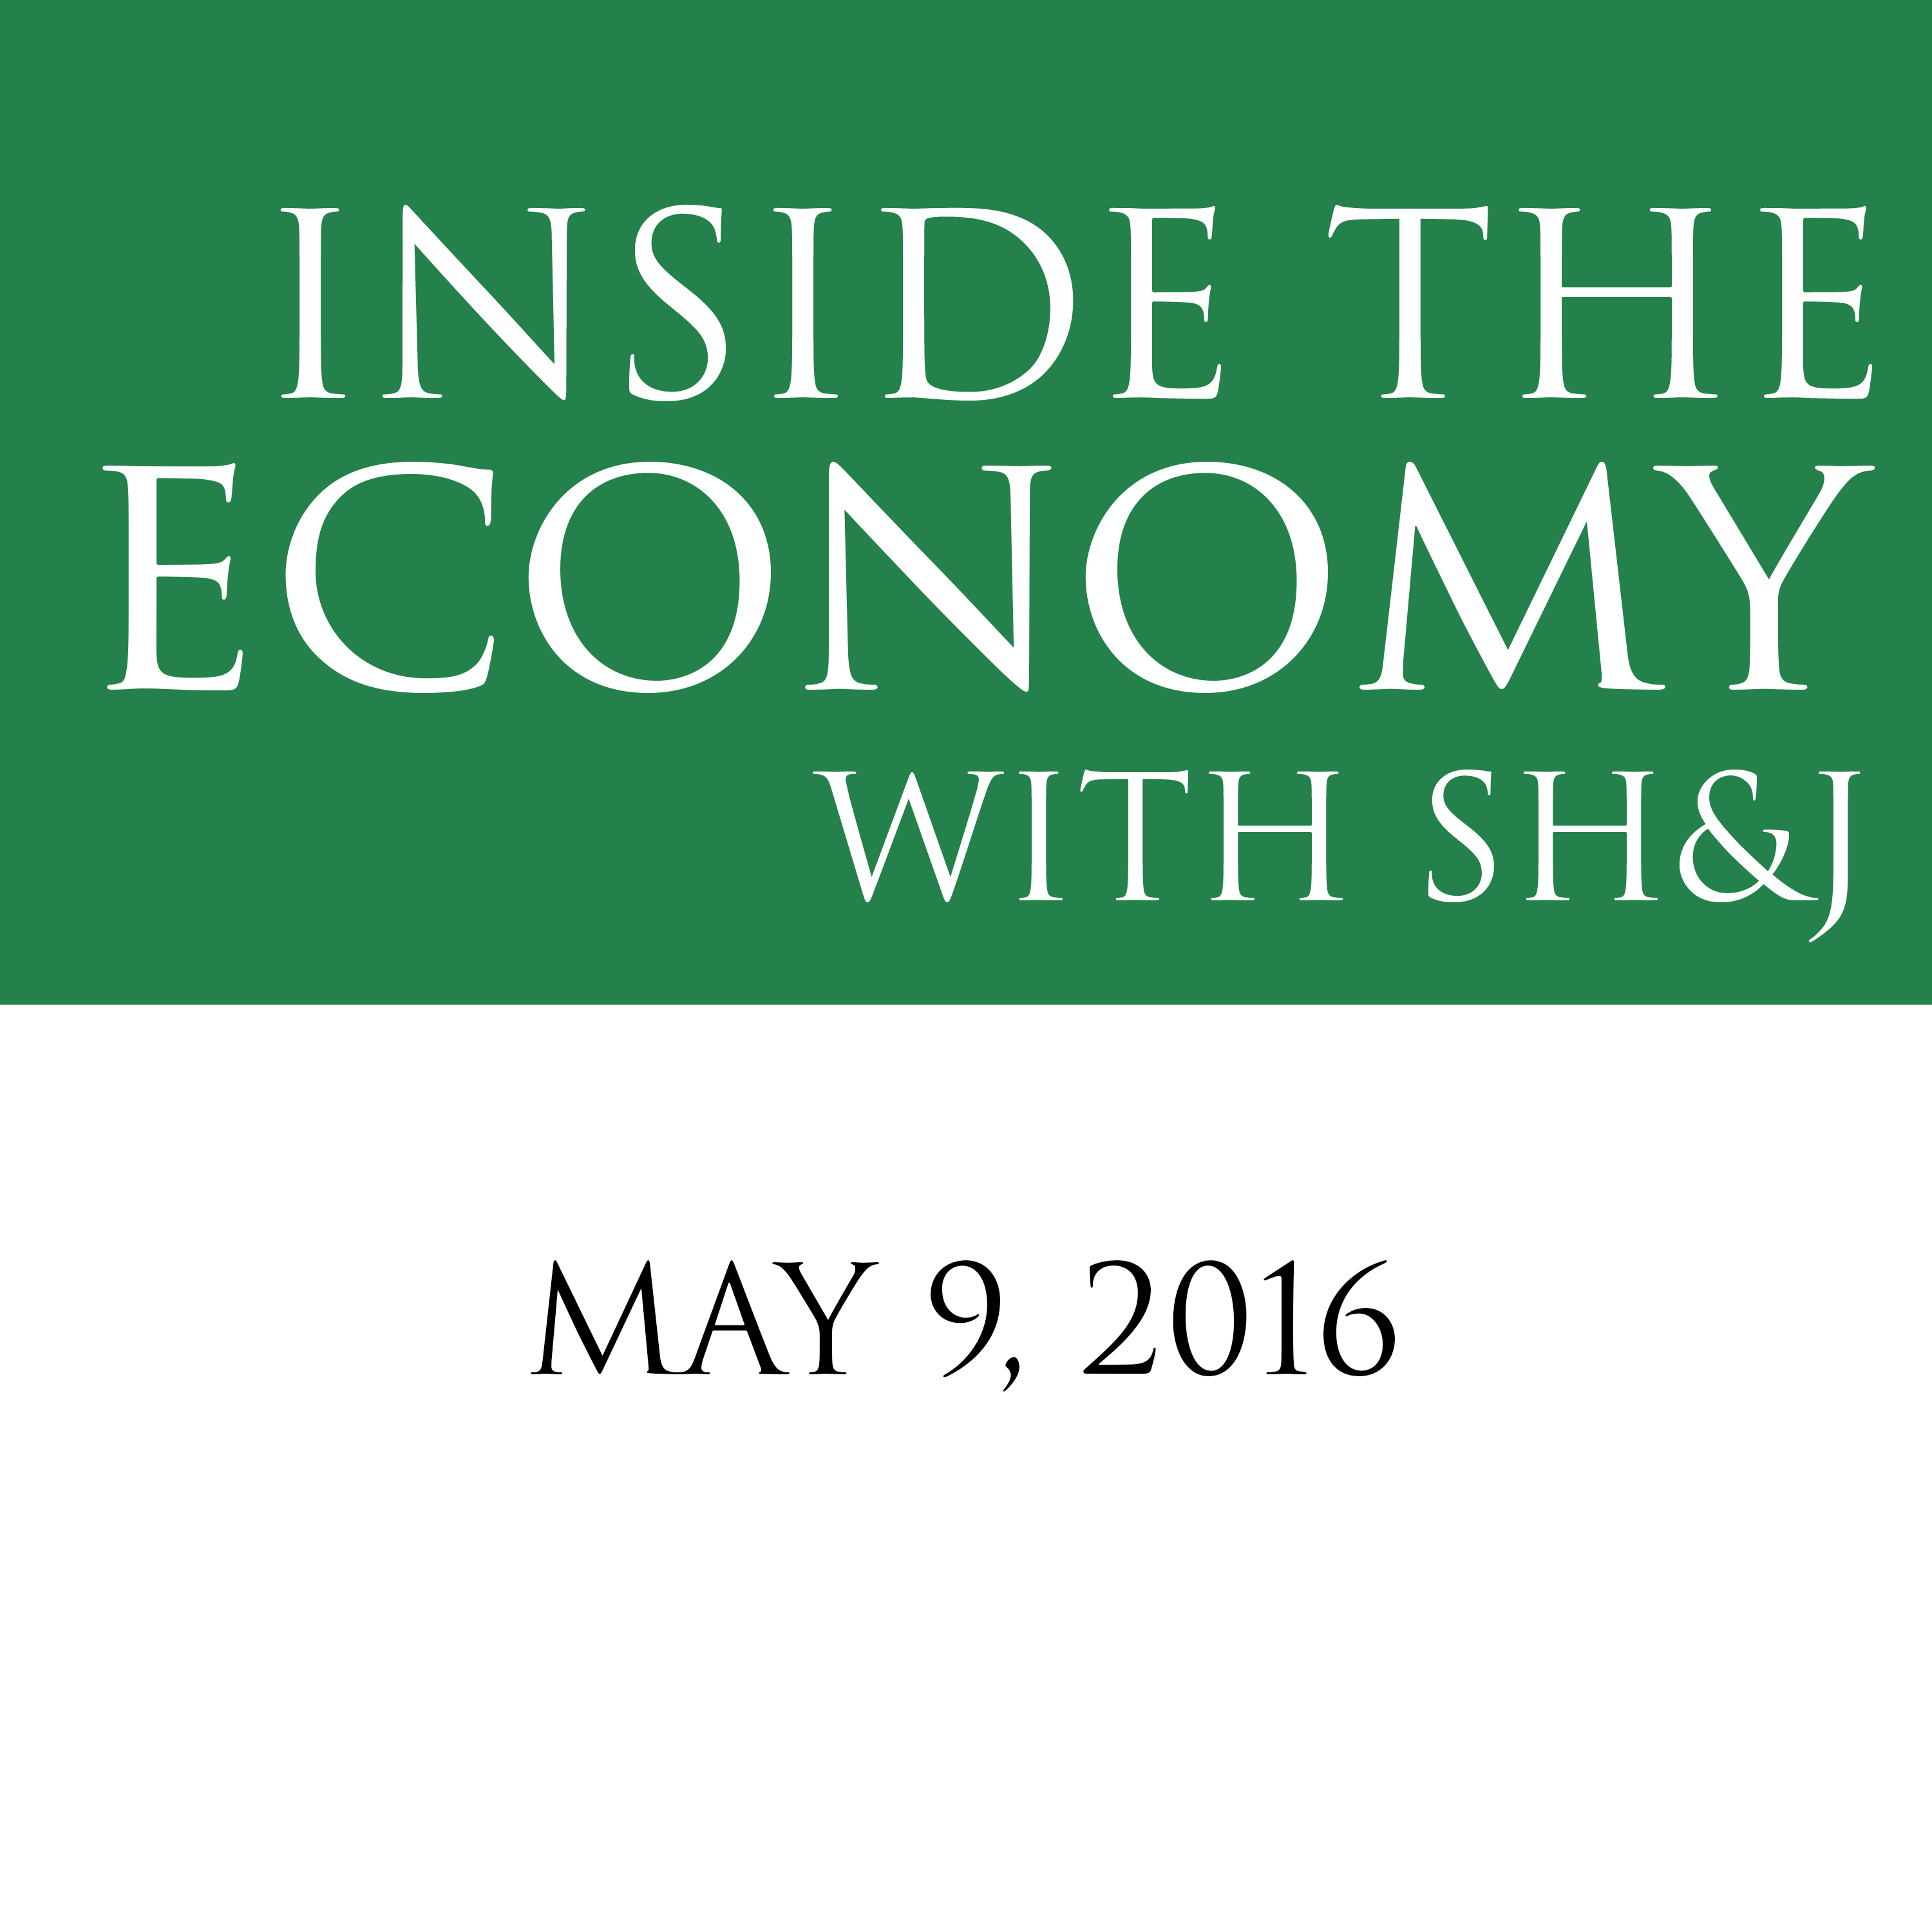 May 9, 2016  --  Inside the Economy With SH&J